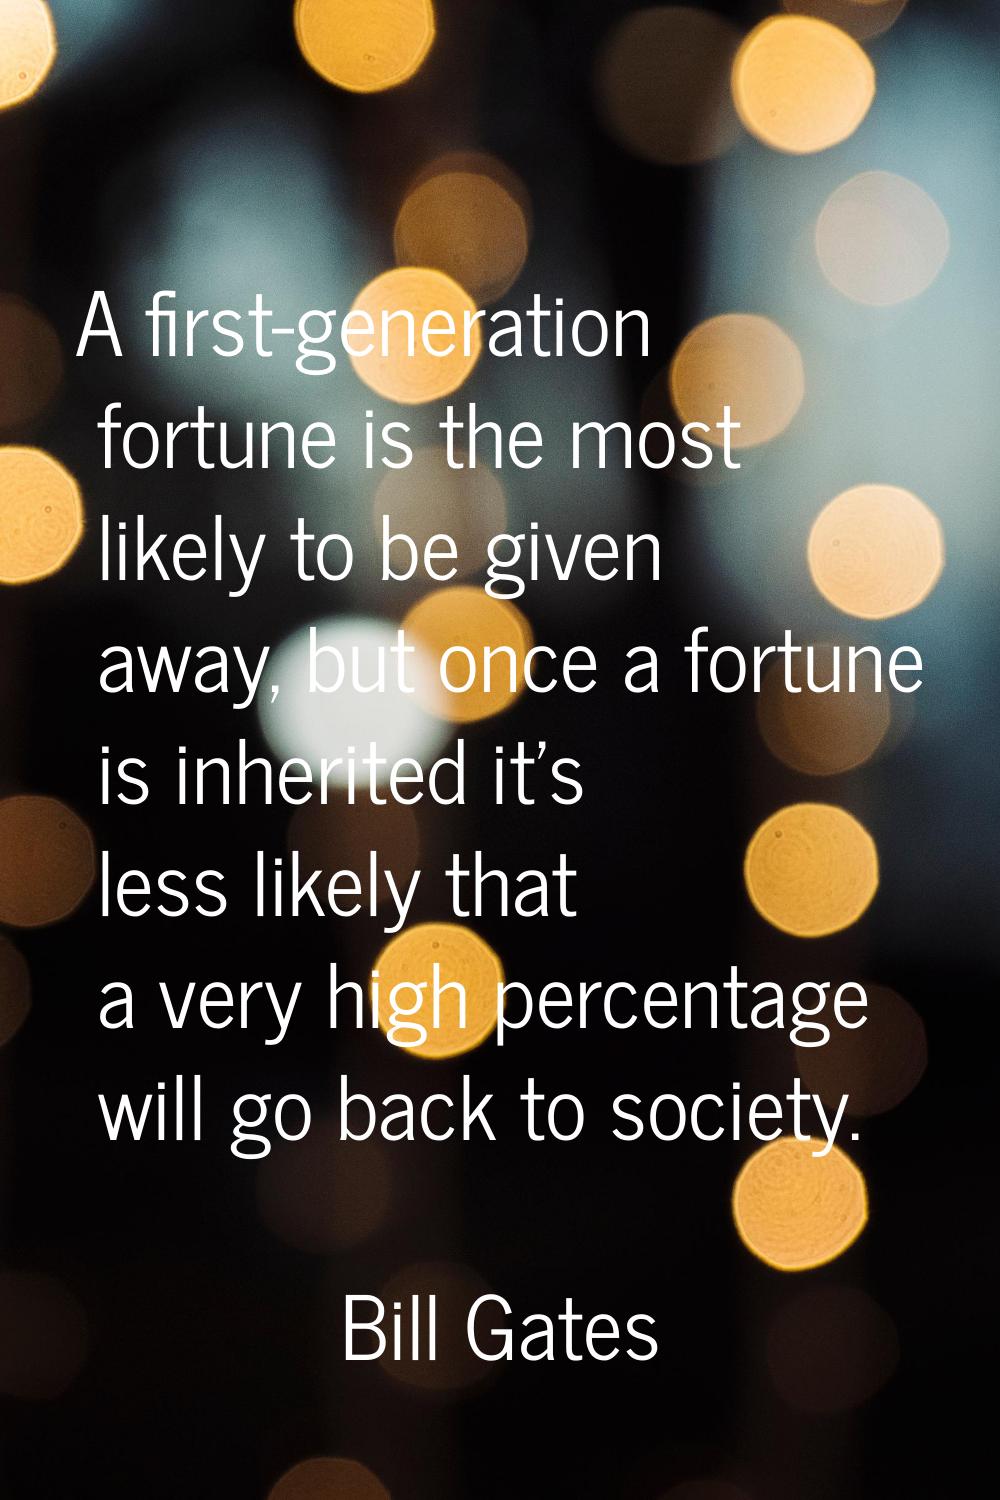 A first-generation fortune is the most likely to be given away, but once a fortune is inherited it'